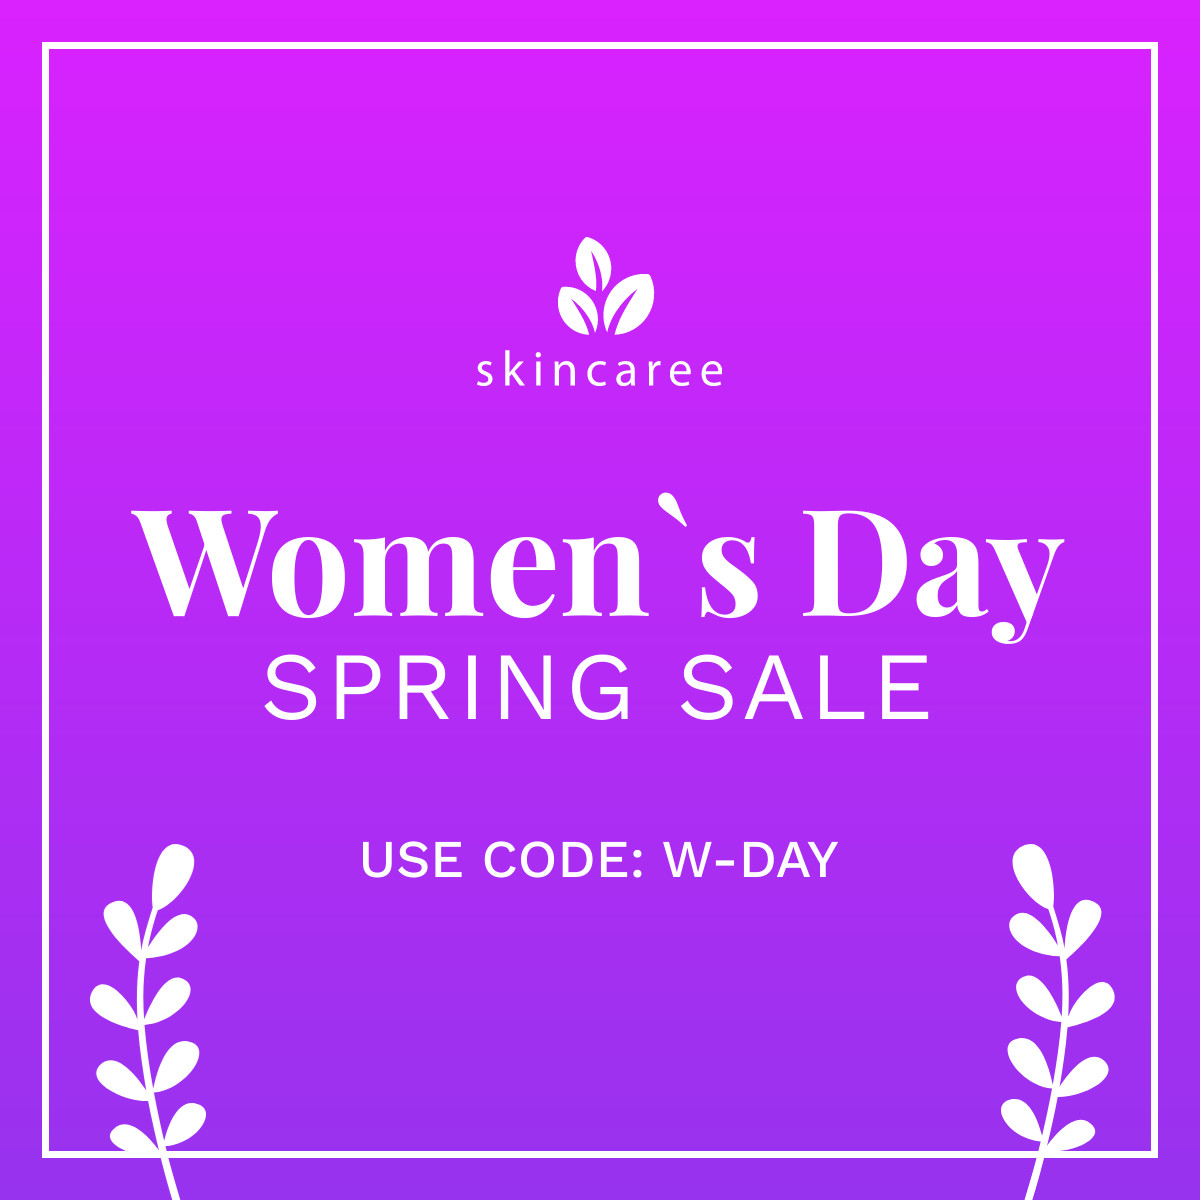 Women's Day Spring Sale Skincaree Inline Rectangle 300x250